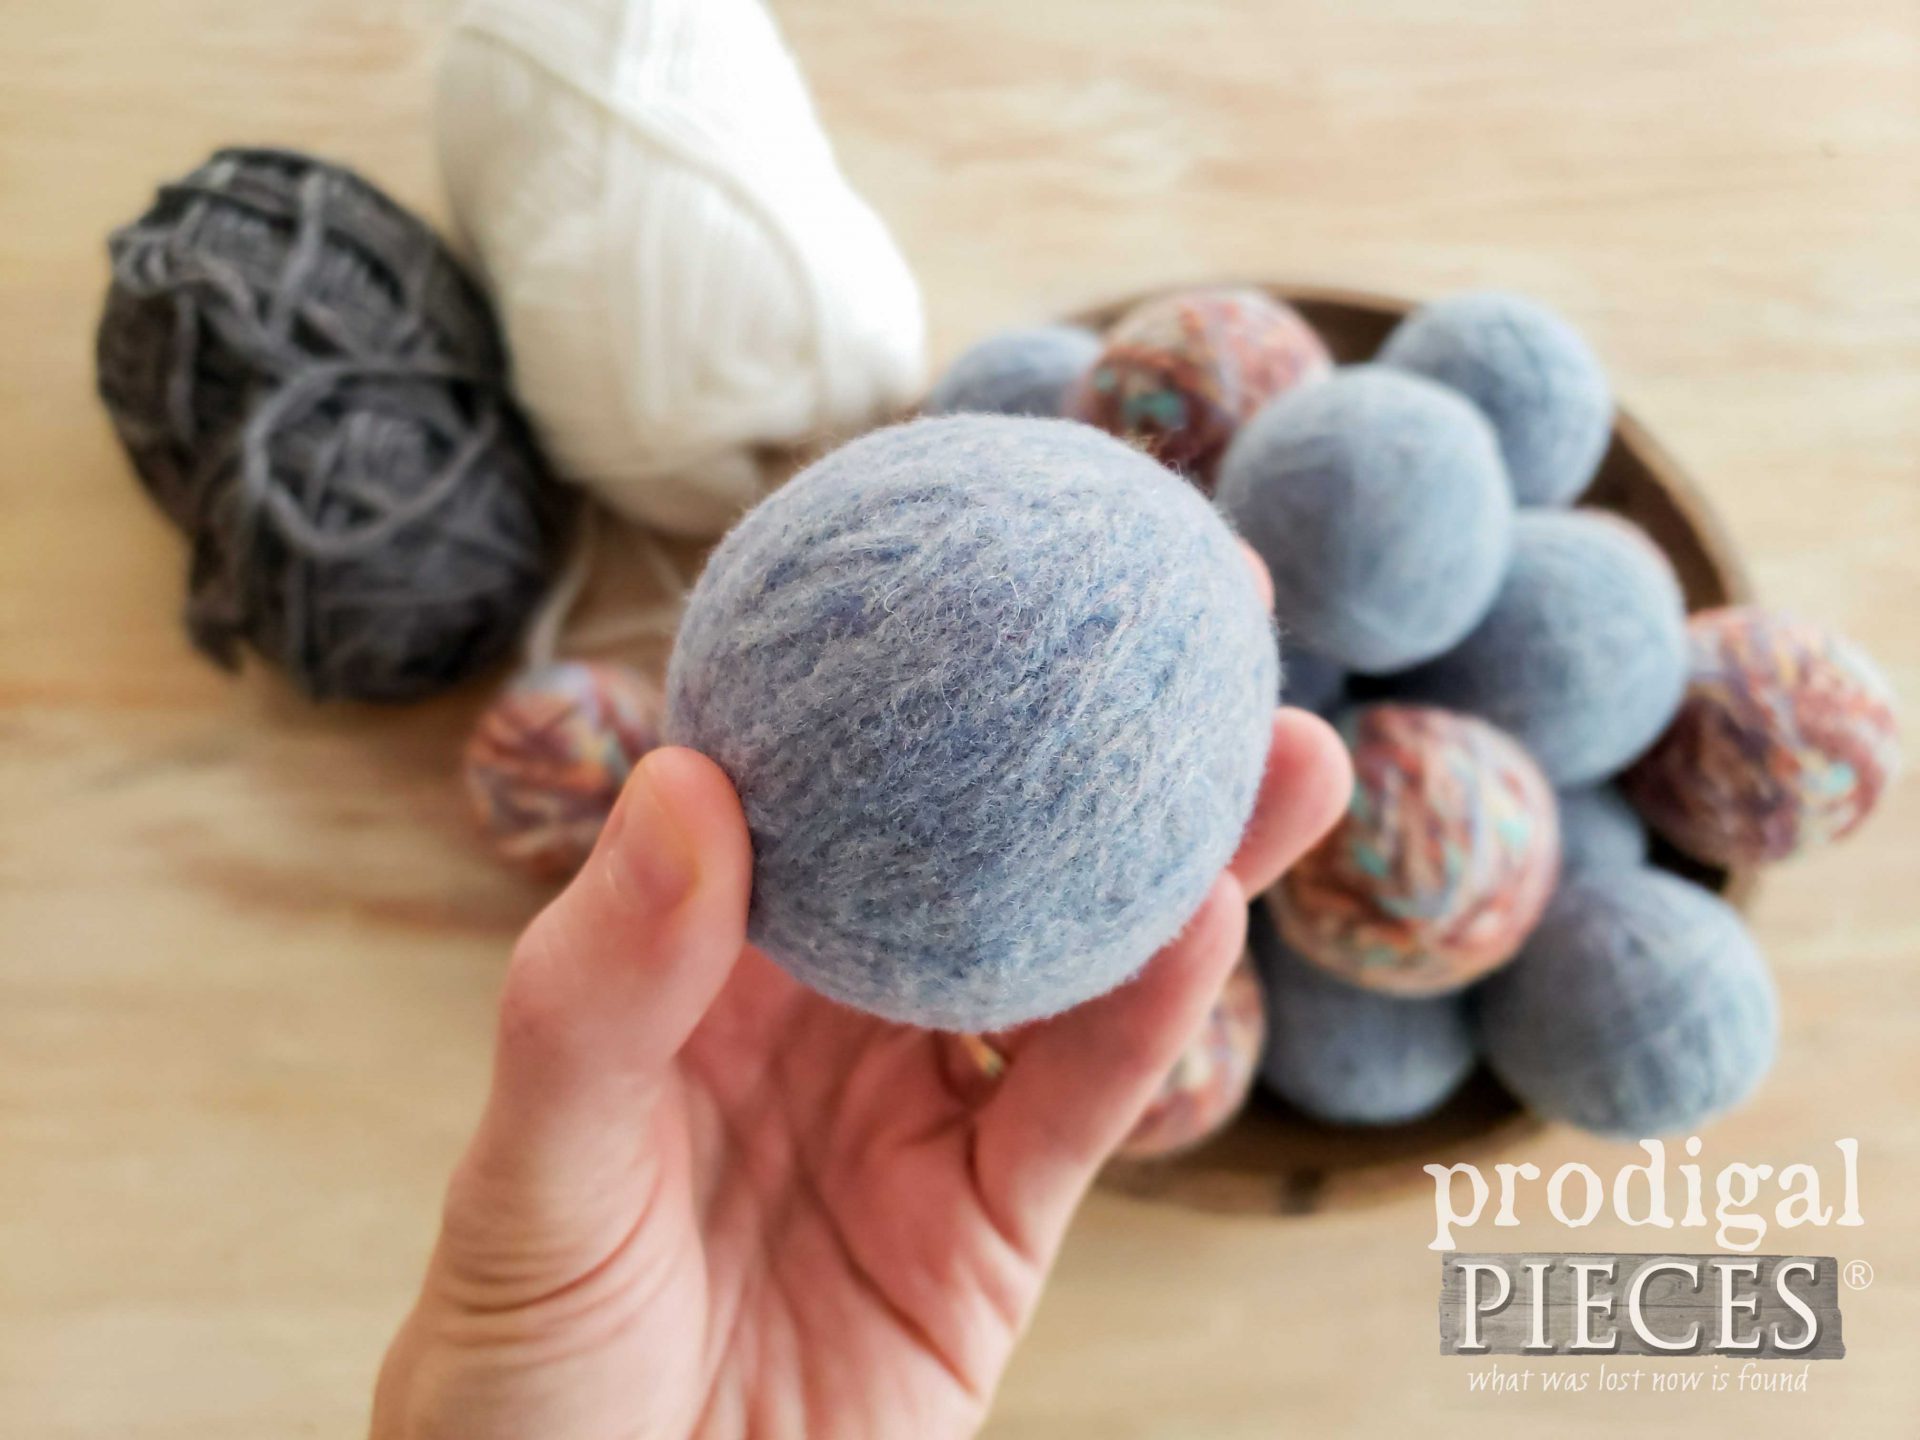 Handmade Wood Dryer Ball from Upcycled Sweater by Larissa of Prodigal Pieces | prodigalpieces.com #prodigalpieces #diy #home #crafts #farmhouse #yarn #laundry